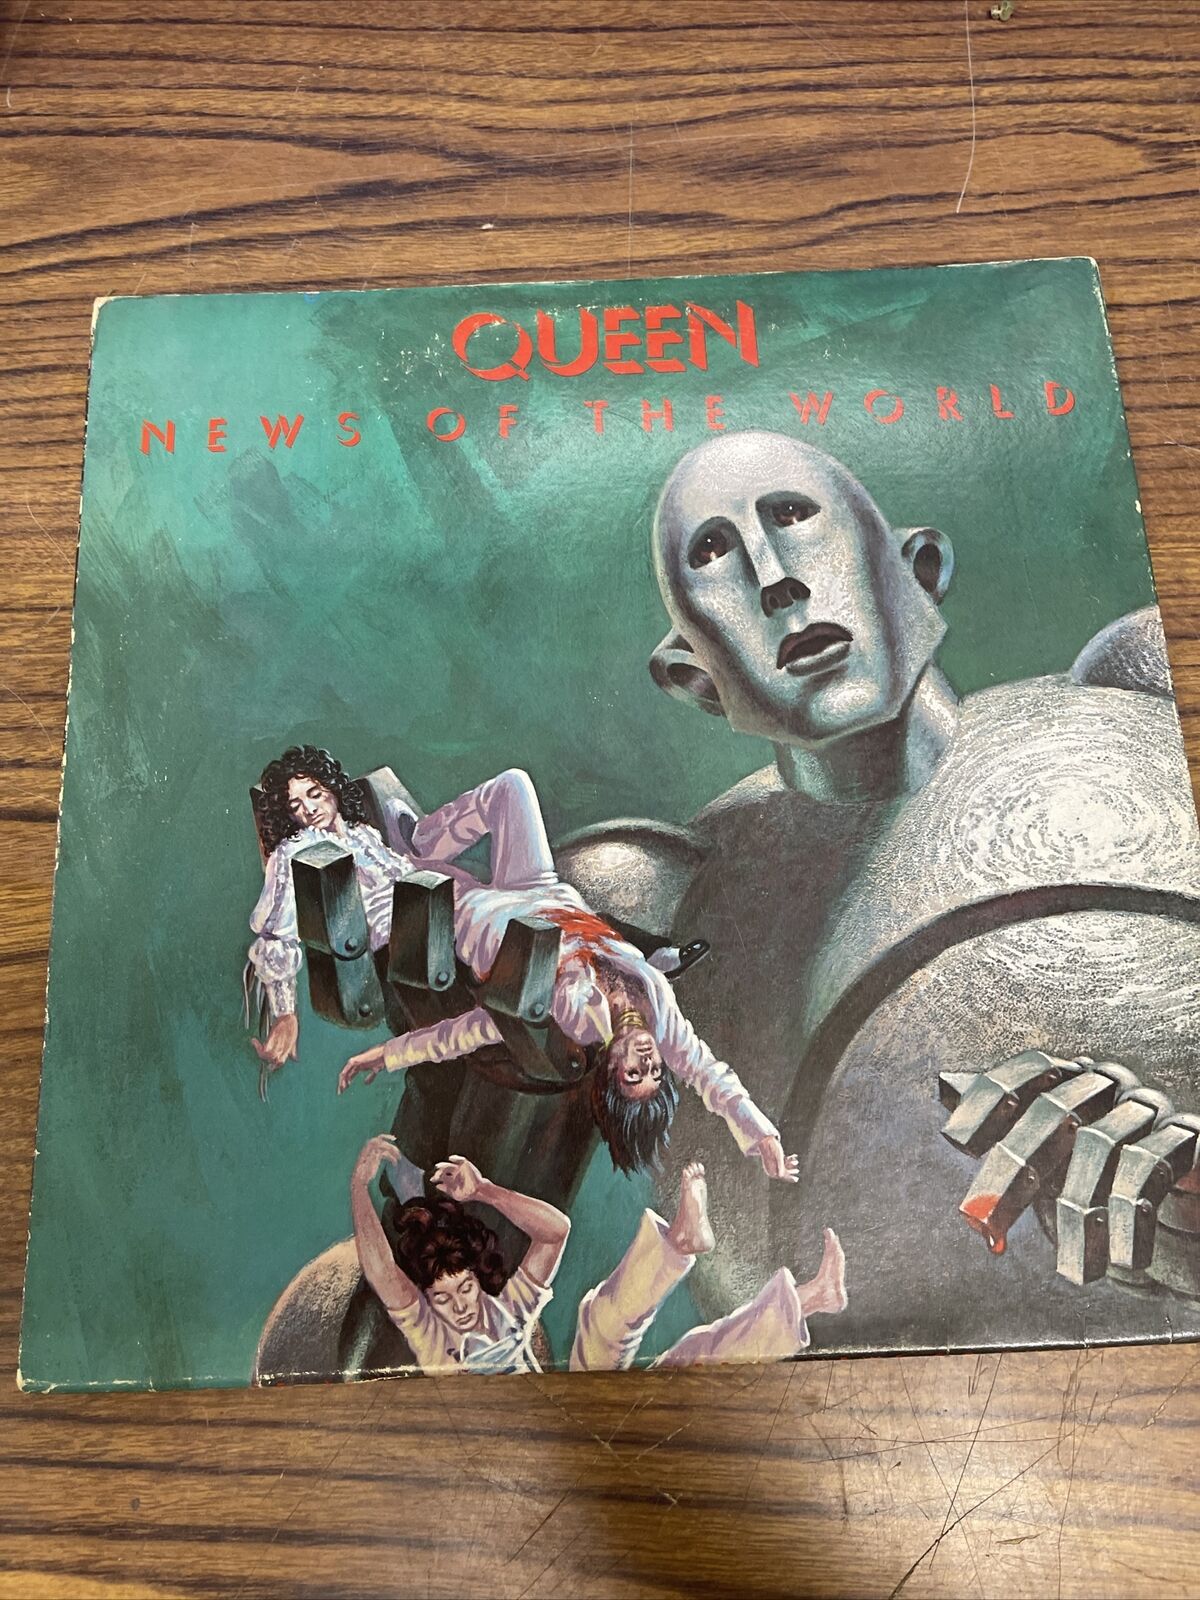 Queen - News of the World LP Vintage Vinyl Record 1977 1st Edition 